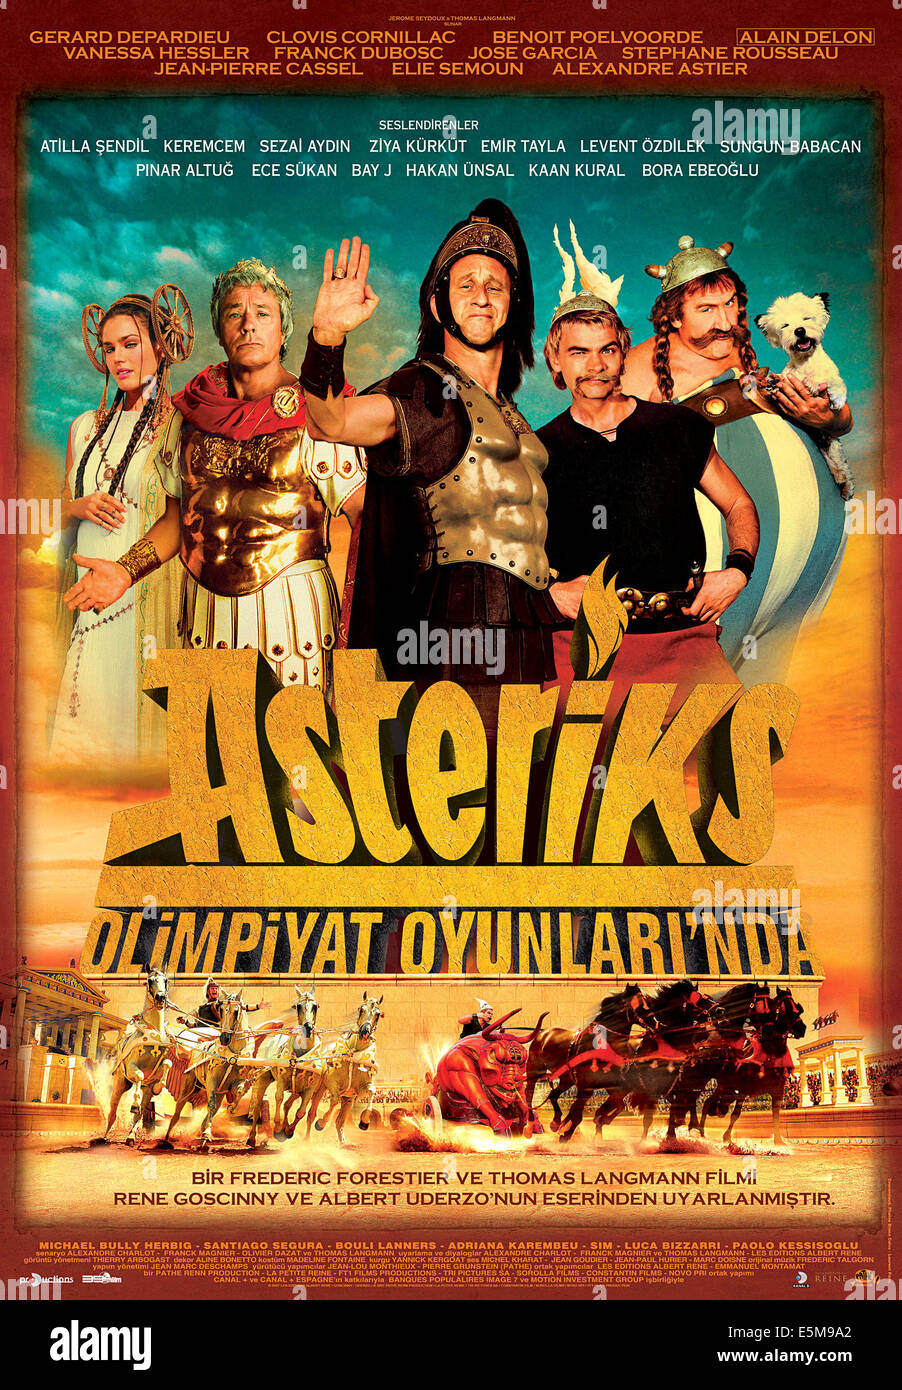 ASTERIX AT THE OLYMPIC GAMES, (aka ASTERIX AUX JEUX OLYMPIQUES), Vanessa  Hessler, Alain Delon as Julius Caesar, Benoit Stock Photo - Alamy